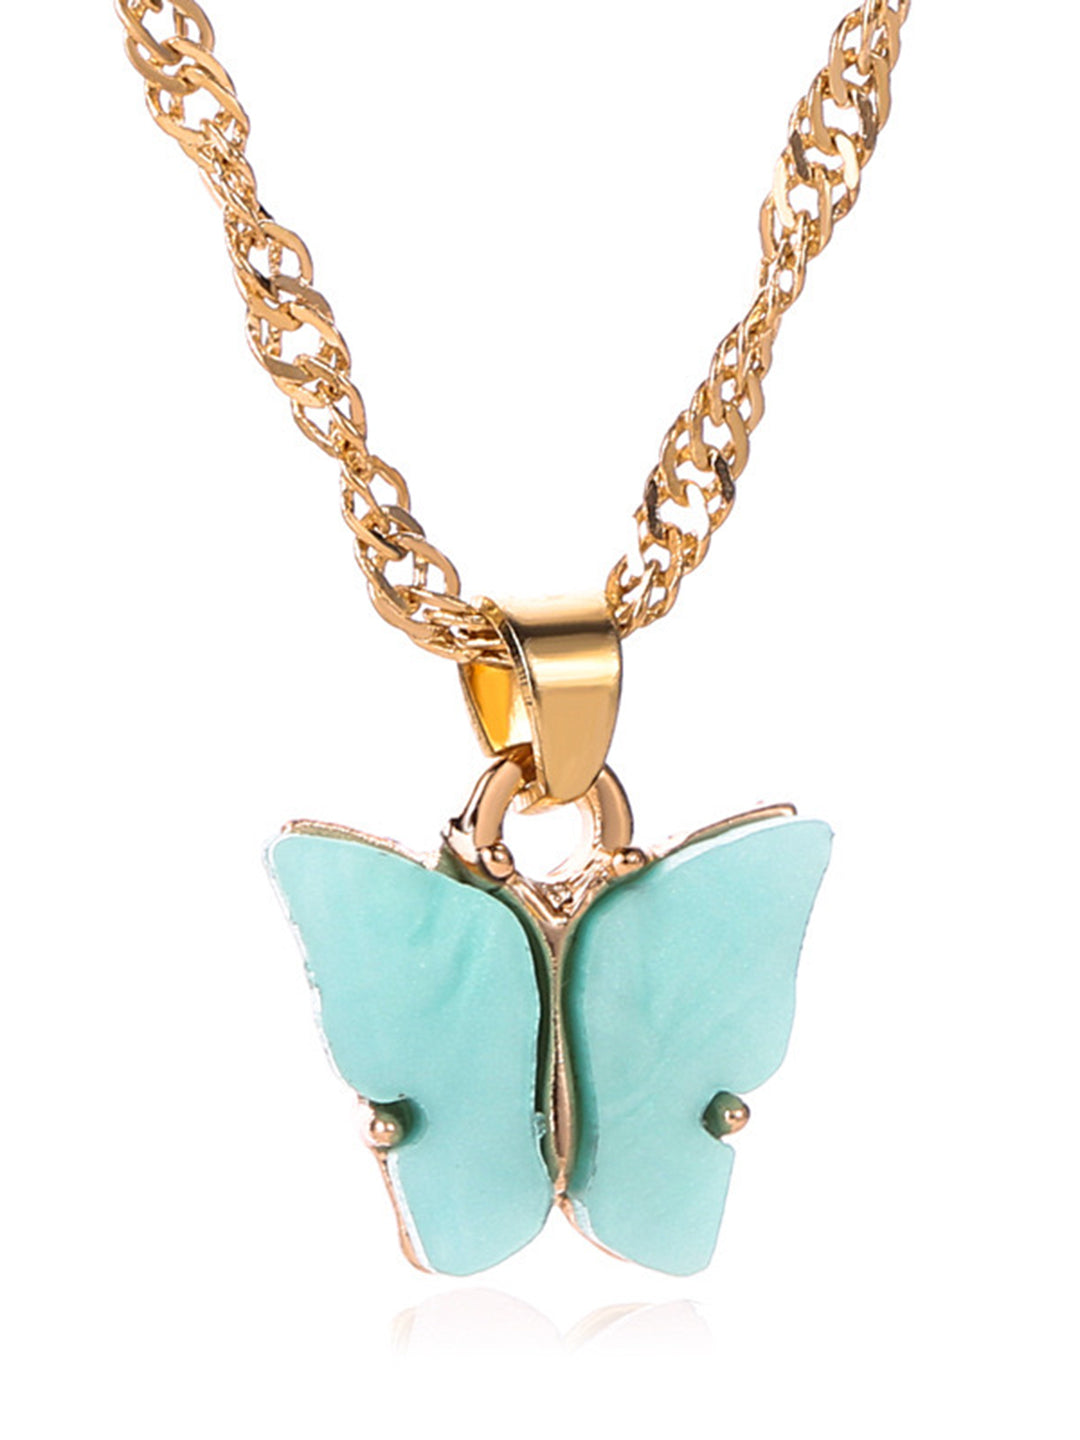 Combo of Mariposa Necklace with Crystal Butterfly Ring